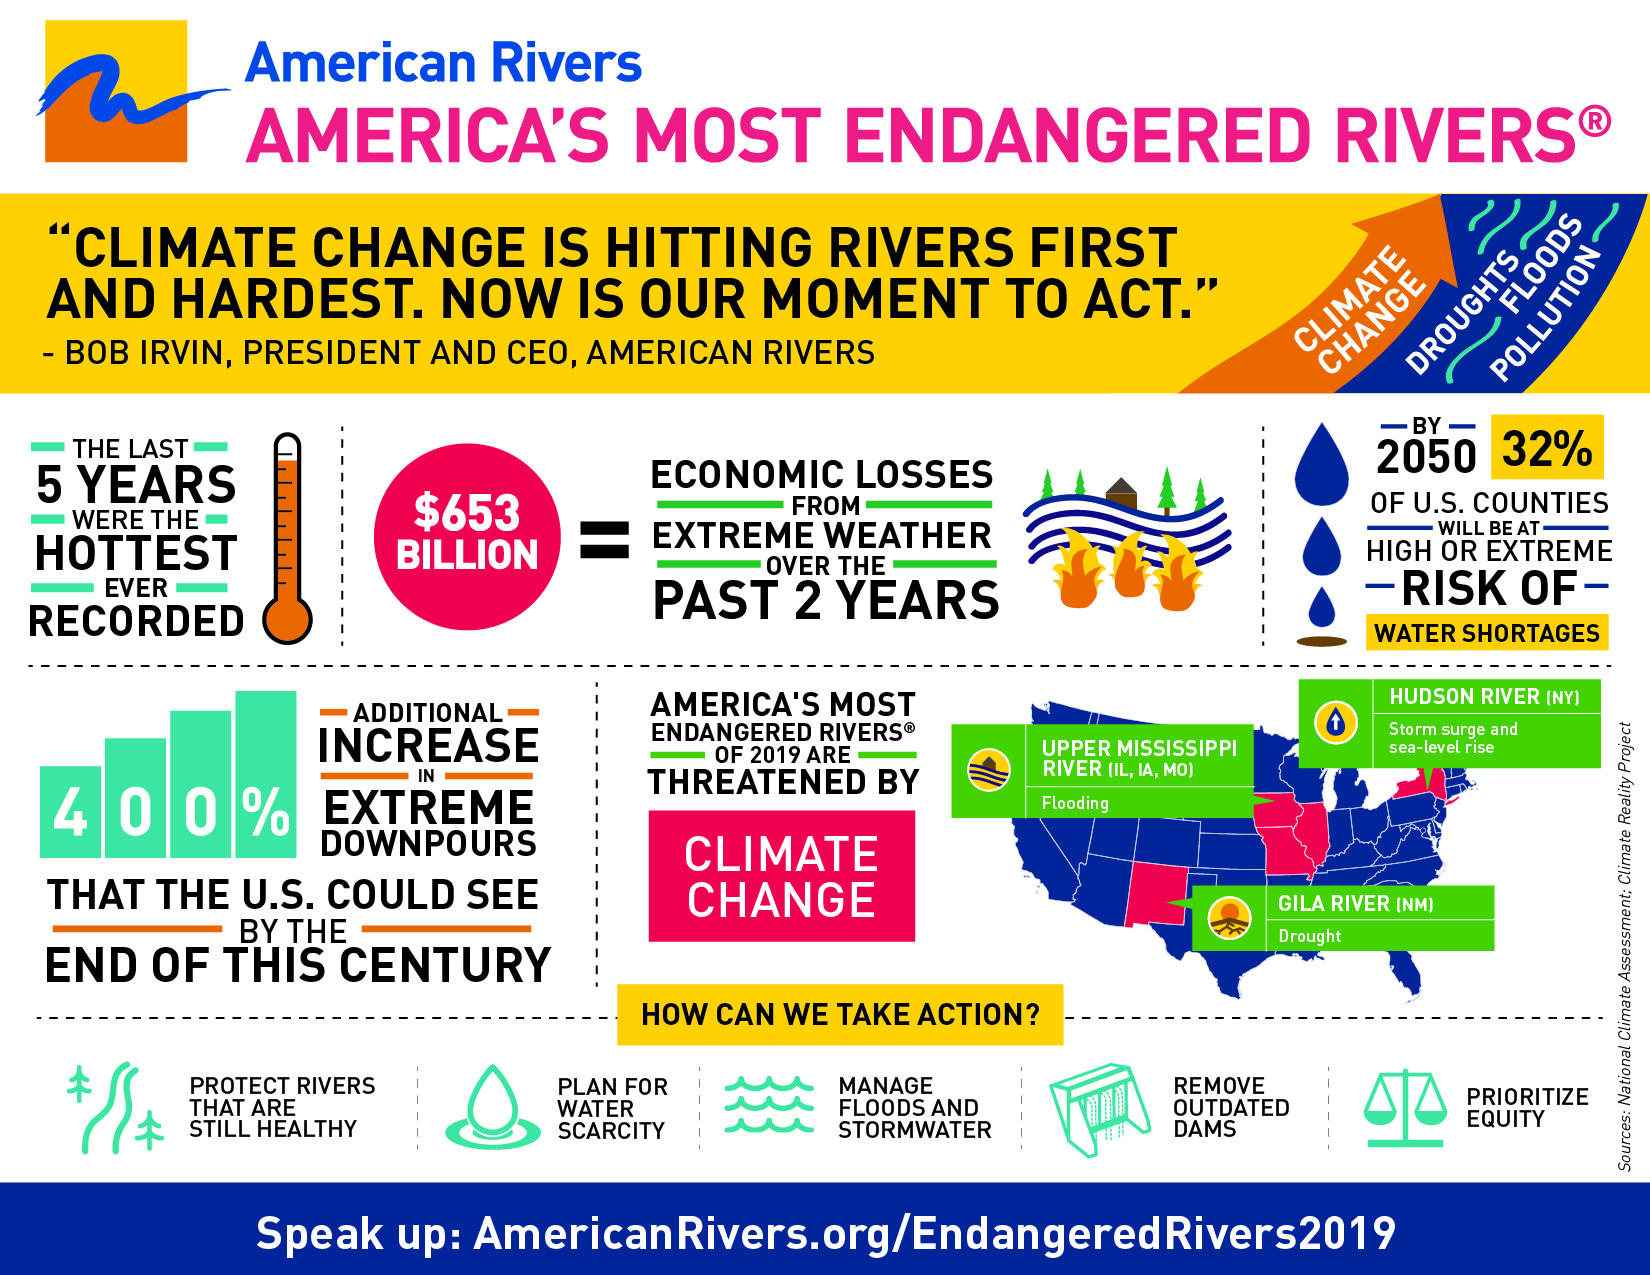 2019's Endangered River report features Gila River